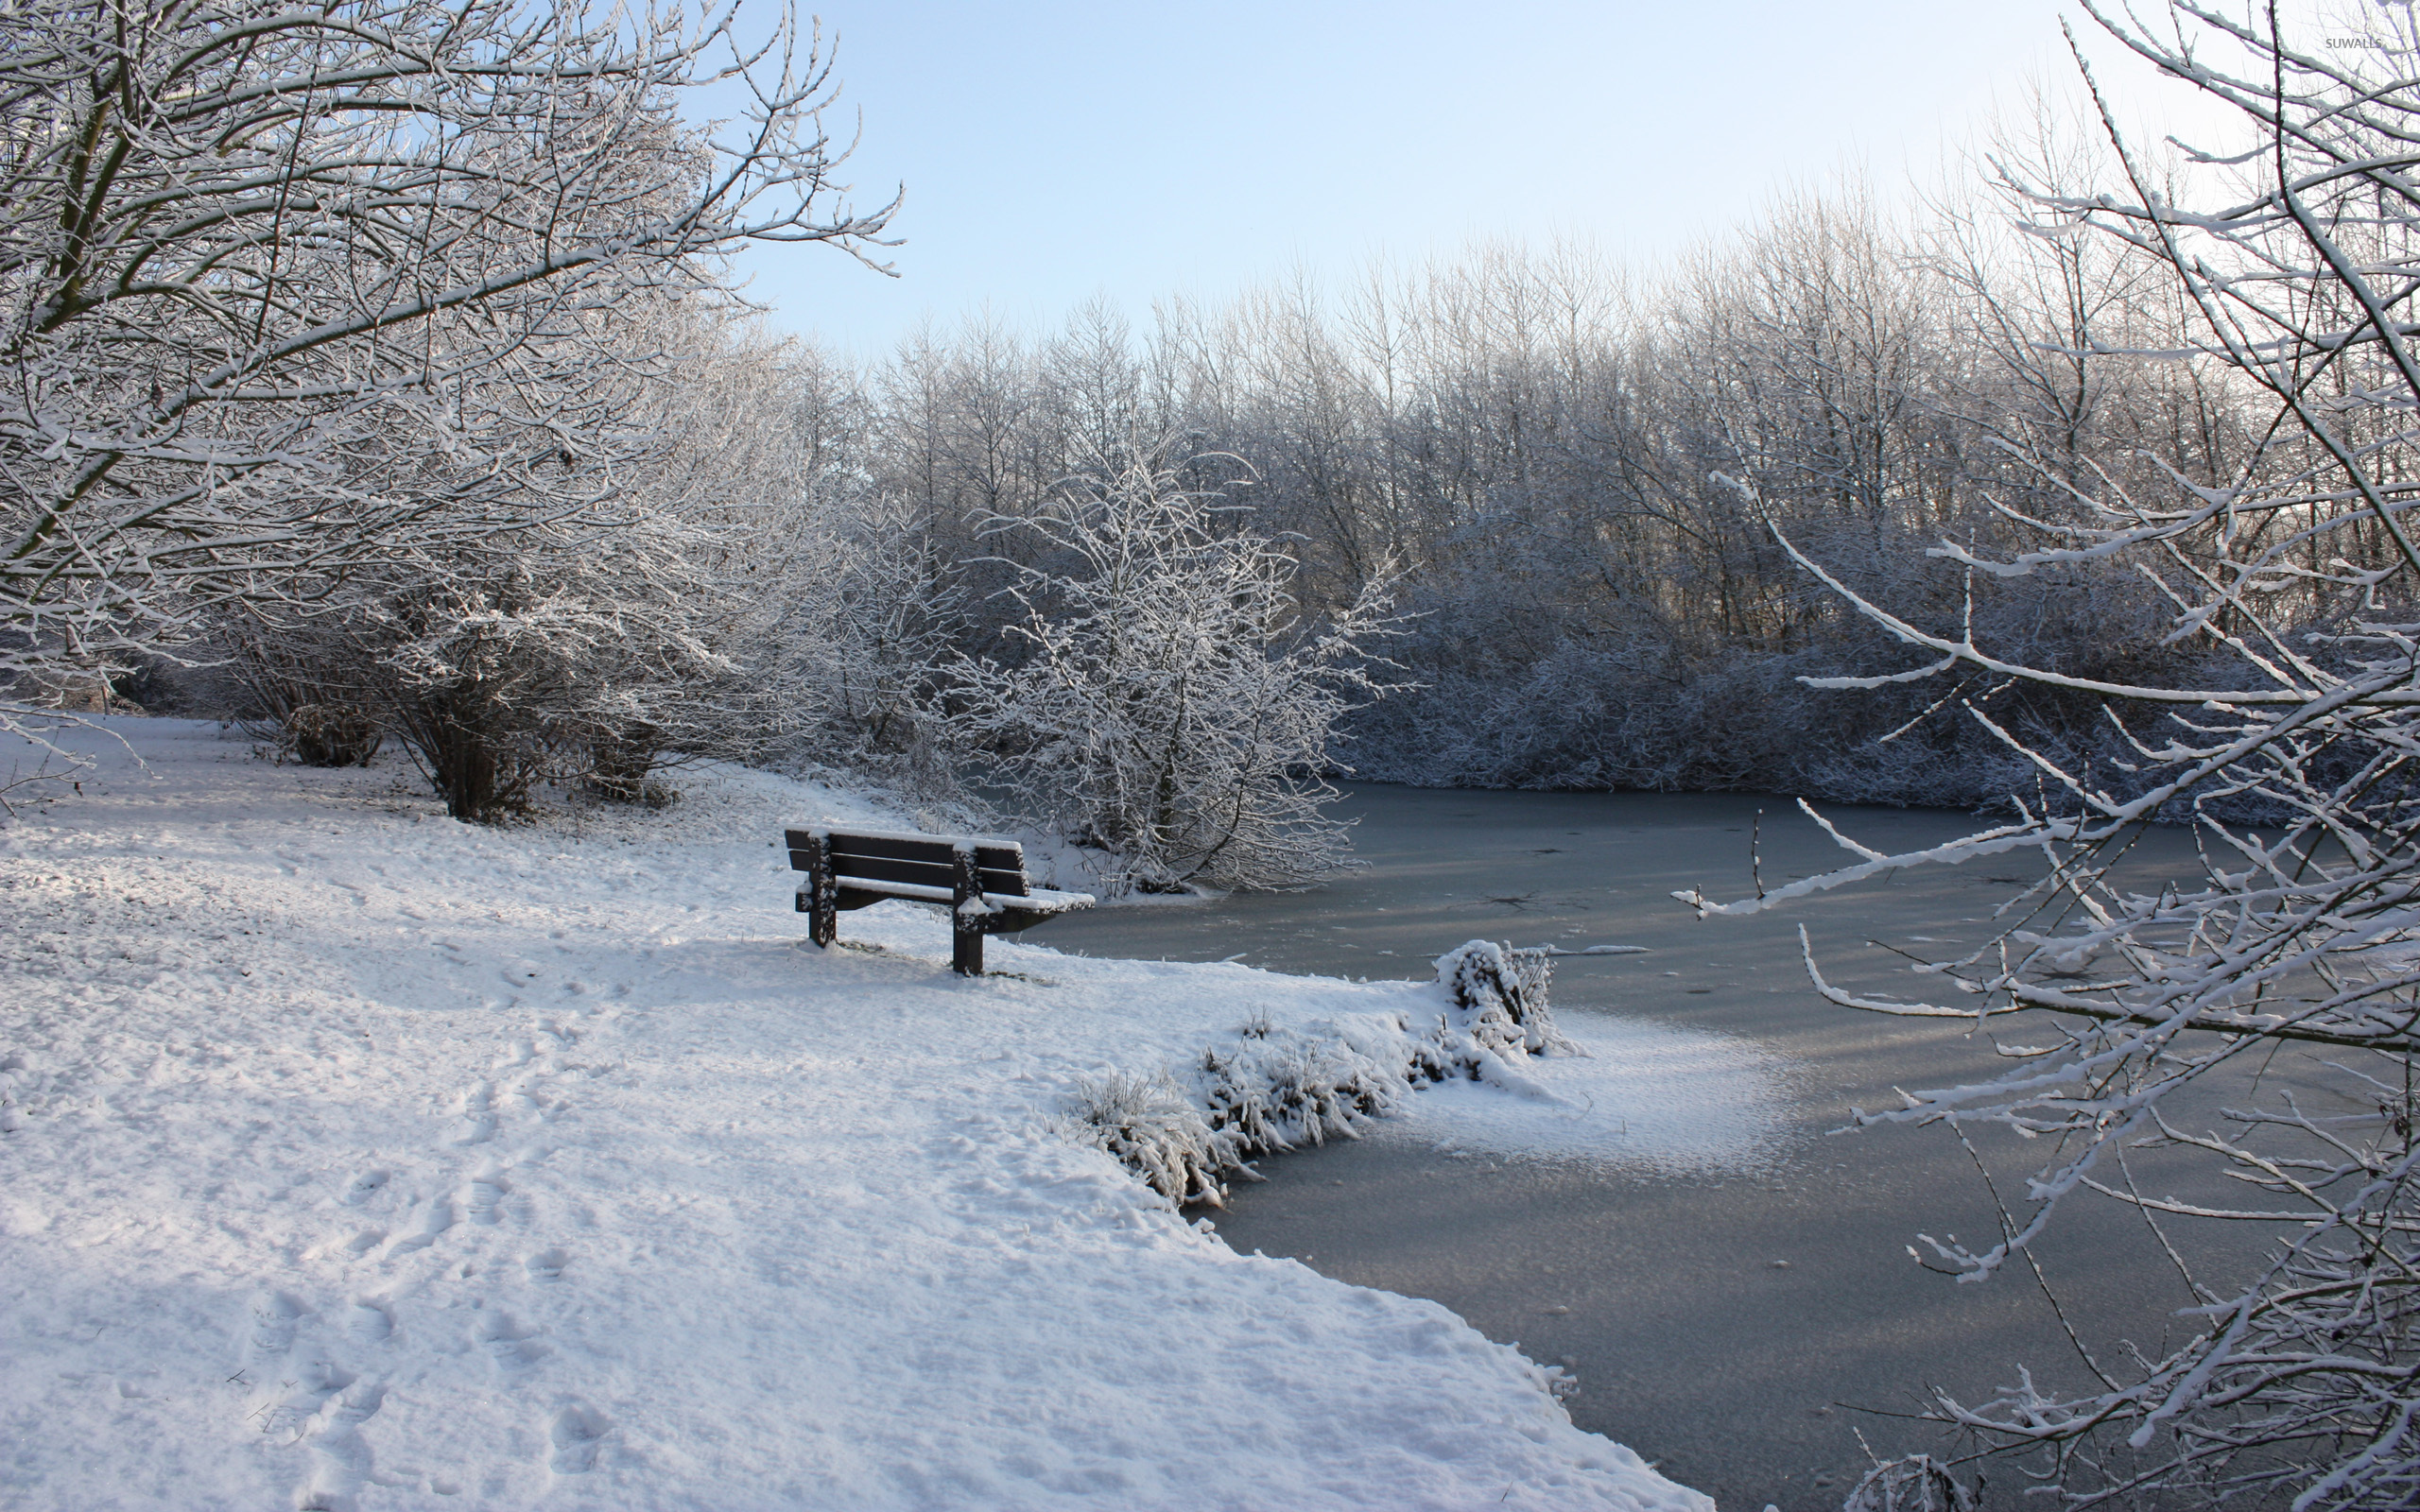 Snowy bench by the frozen river wallpaper - Nature wallpapers - #41345